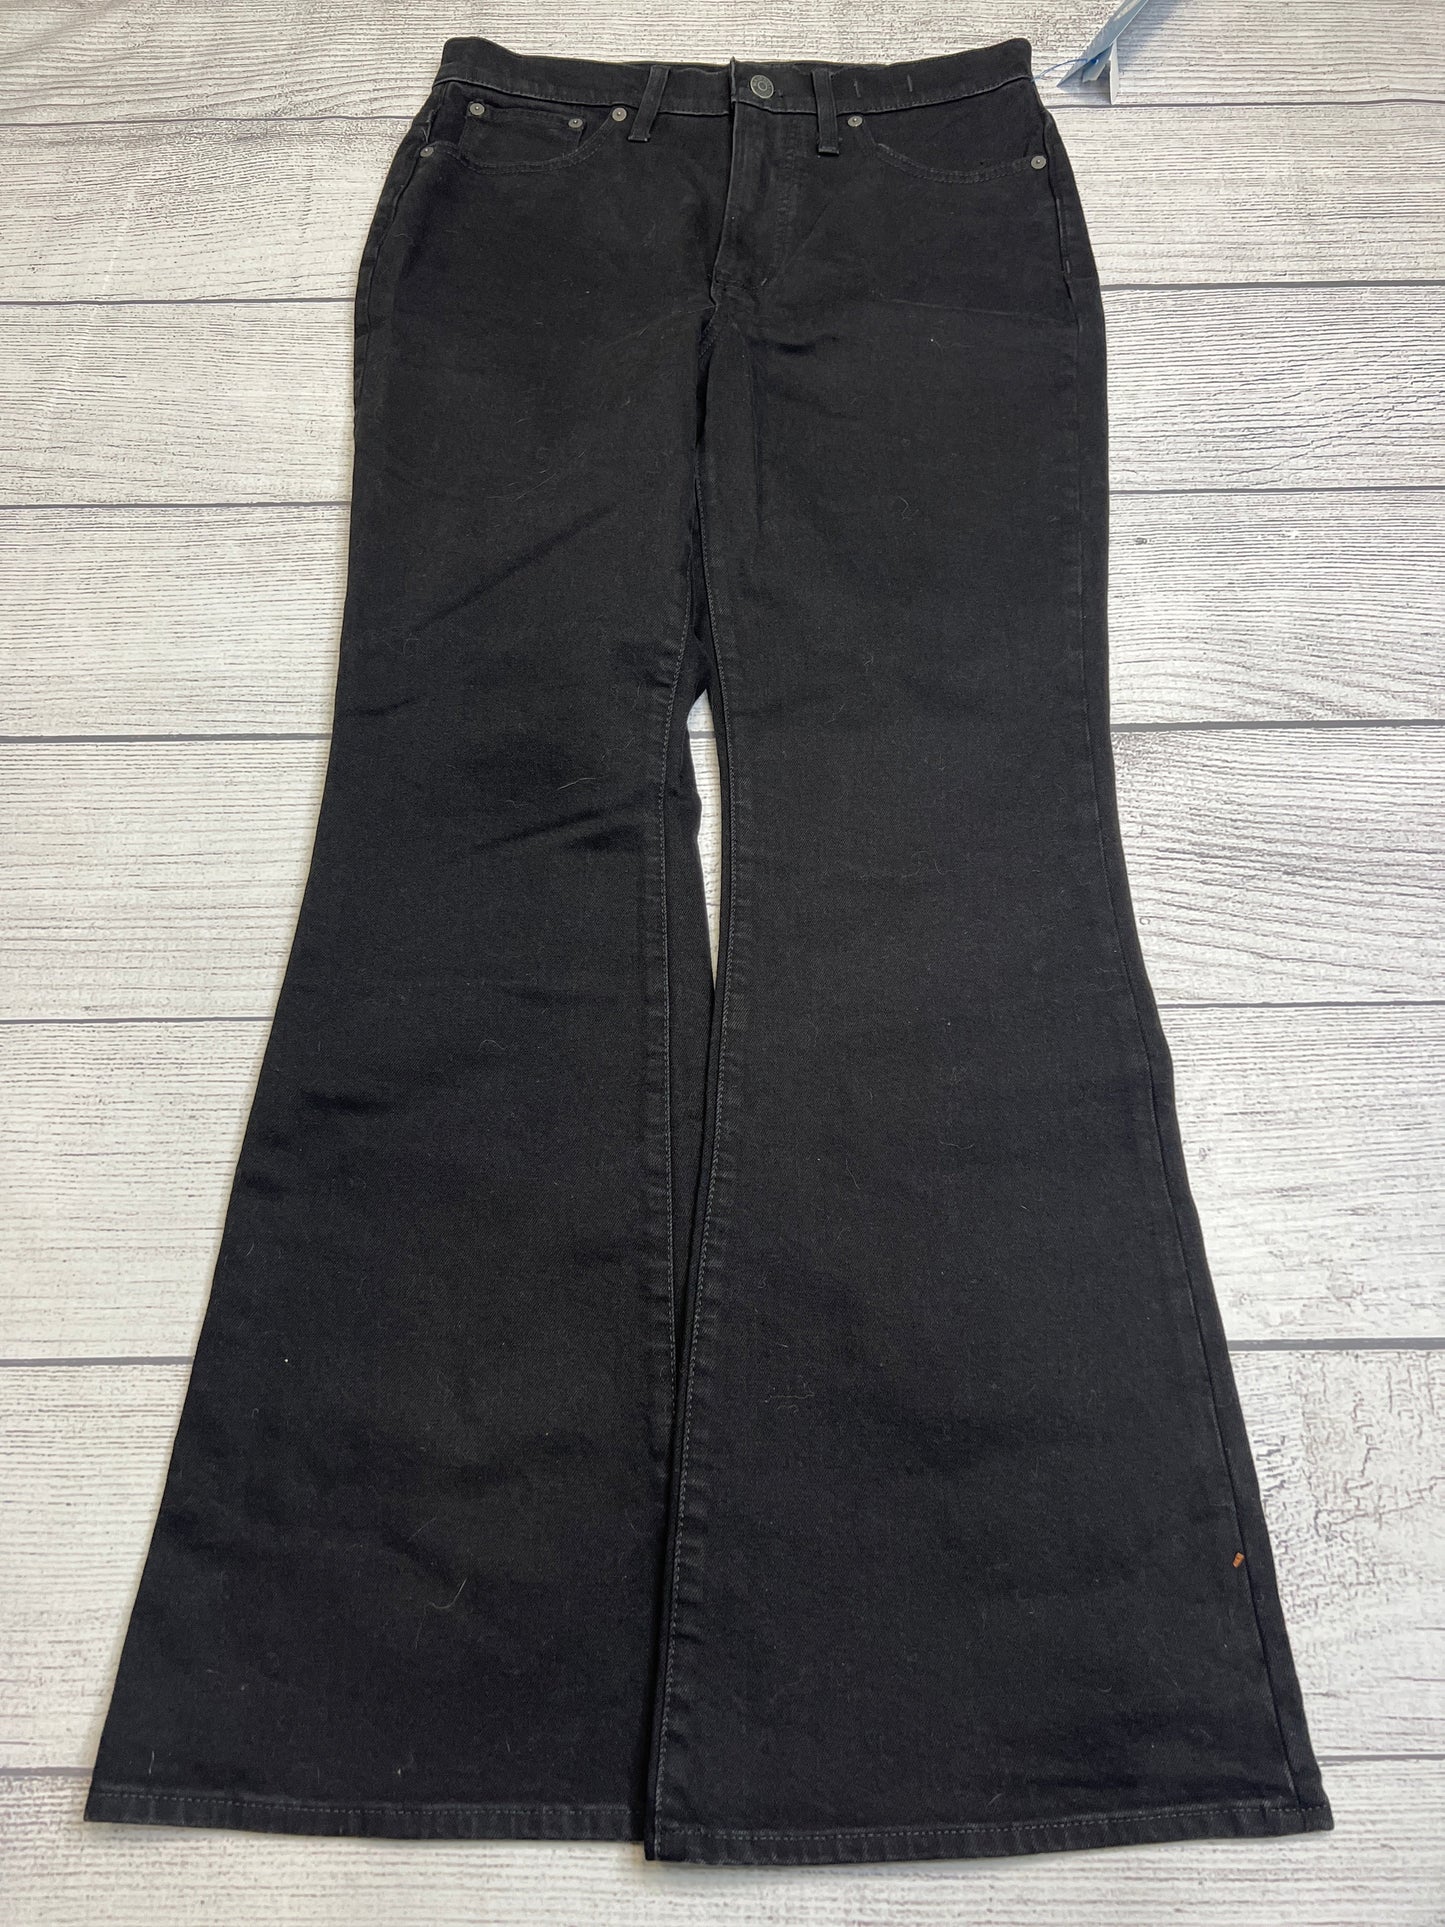 Jeans Relaxed/boyfriend By Madewell  Size: 6